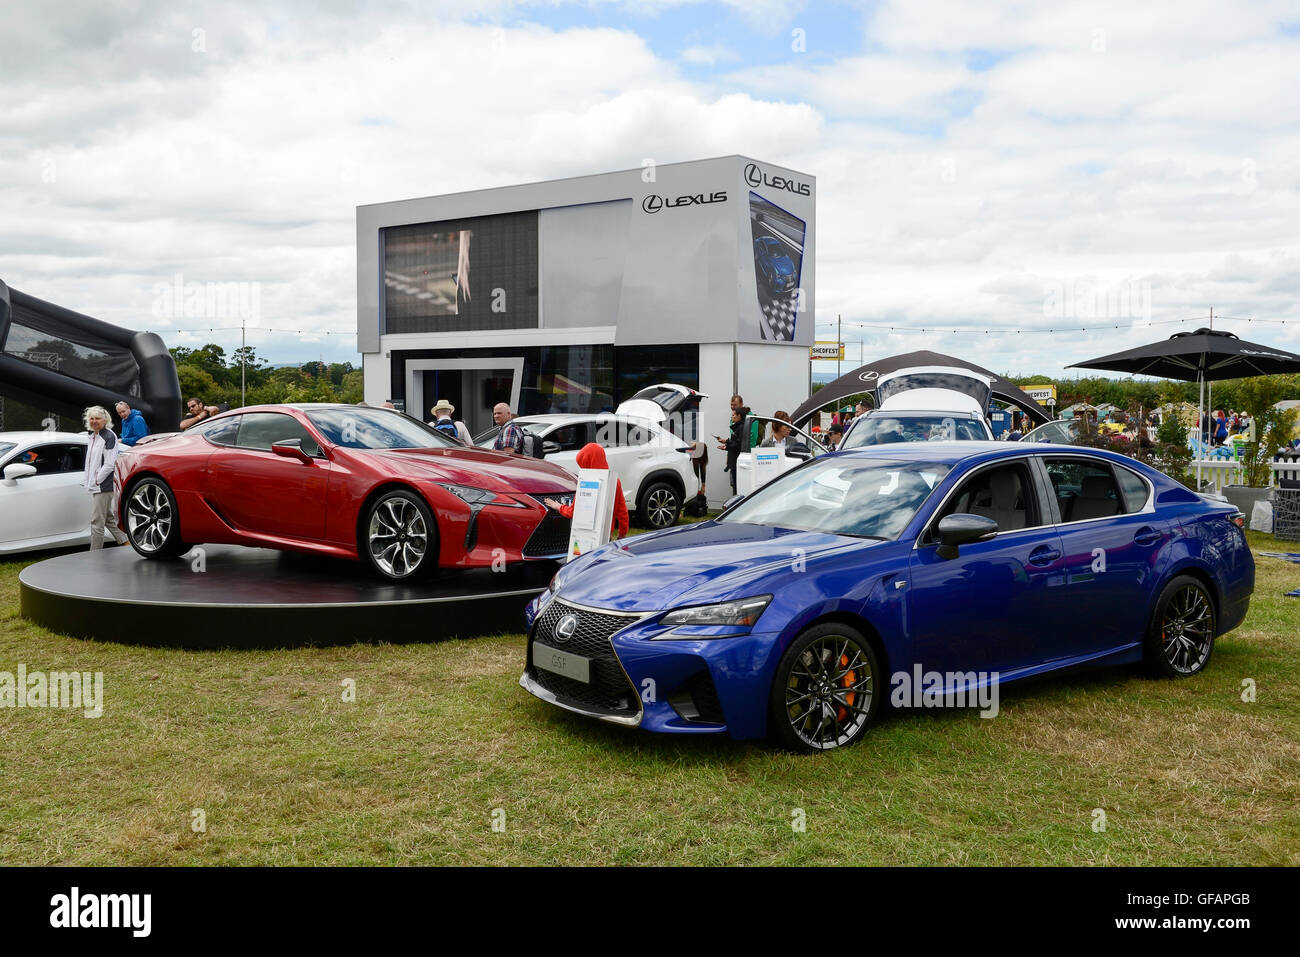 Carfest North, Bolesworth, Cheshire, UK. 30th July 2016. Lexus cars on display. The event is the brainchild of Chris Evans and features 3 days of cars, music and entertainment with profits being donated to the charity Children in Need. Andrew Paterson/Alamy Live News Stock Photo